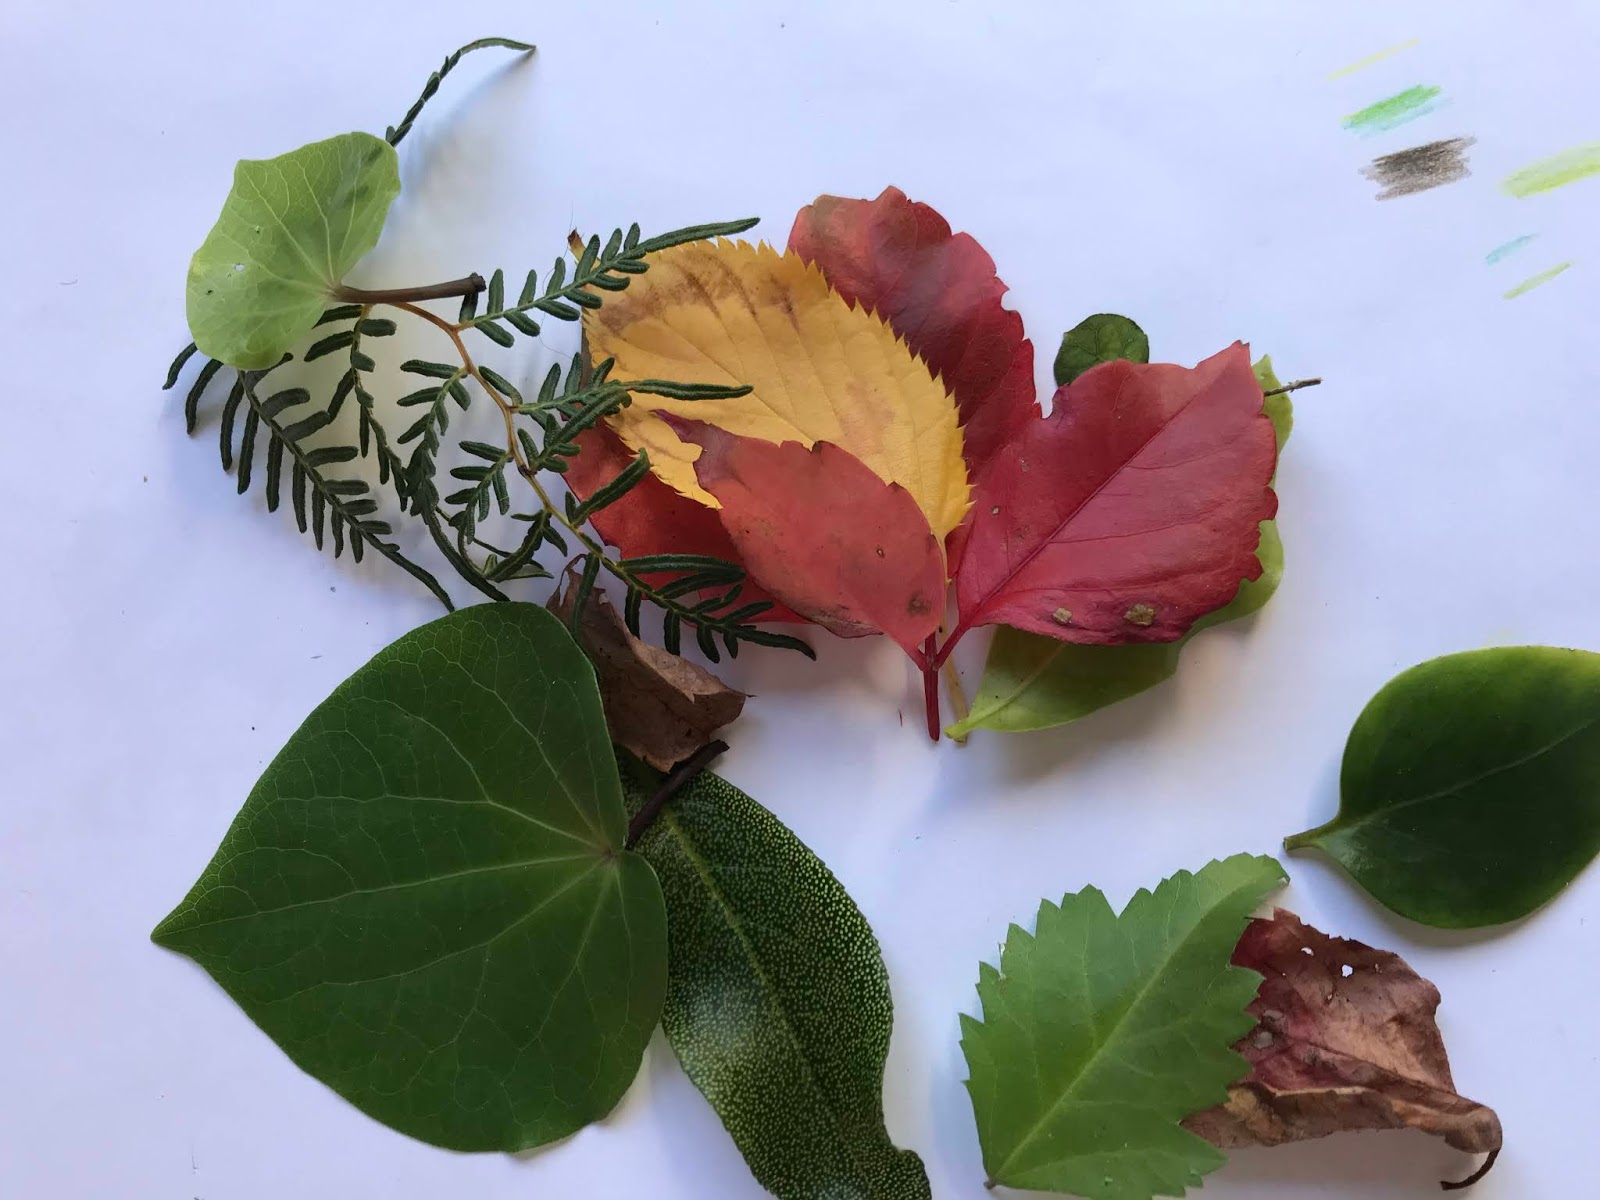 Explore and Discover Nature: Autumn Leaf Study in New Zealand - leaf art,  leaf scavenger hunts and more